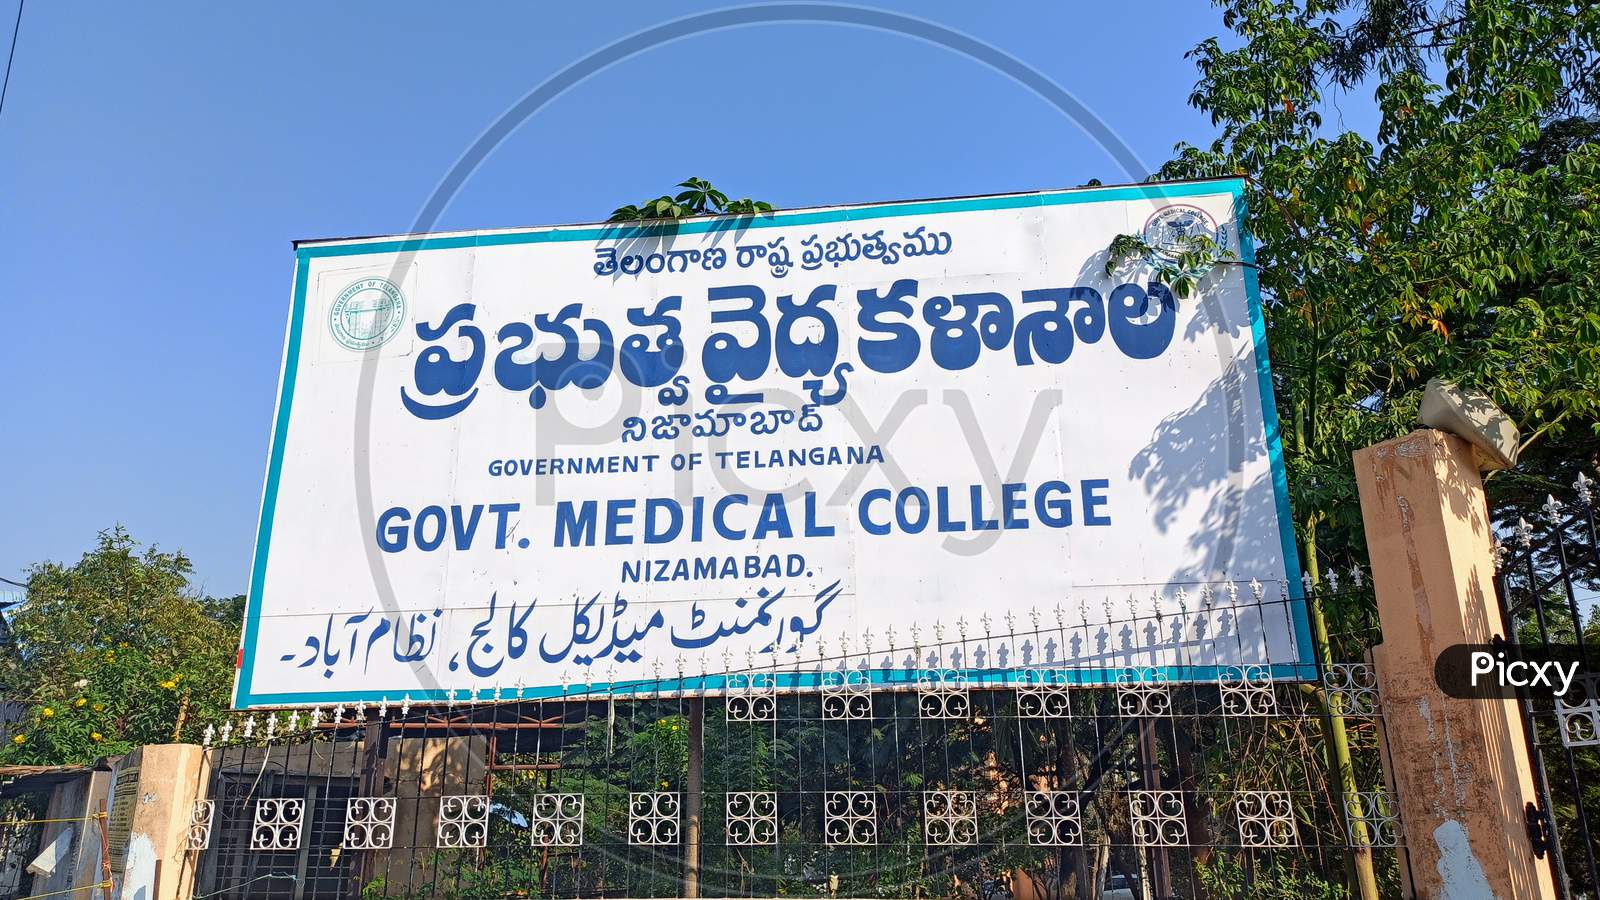 Government of Telangana Government Medical College Nizamabad